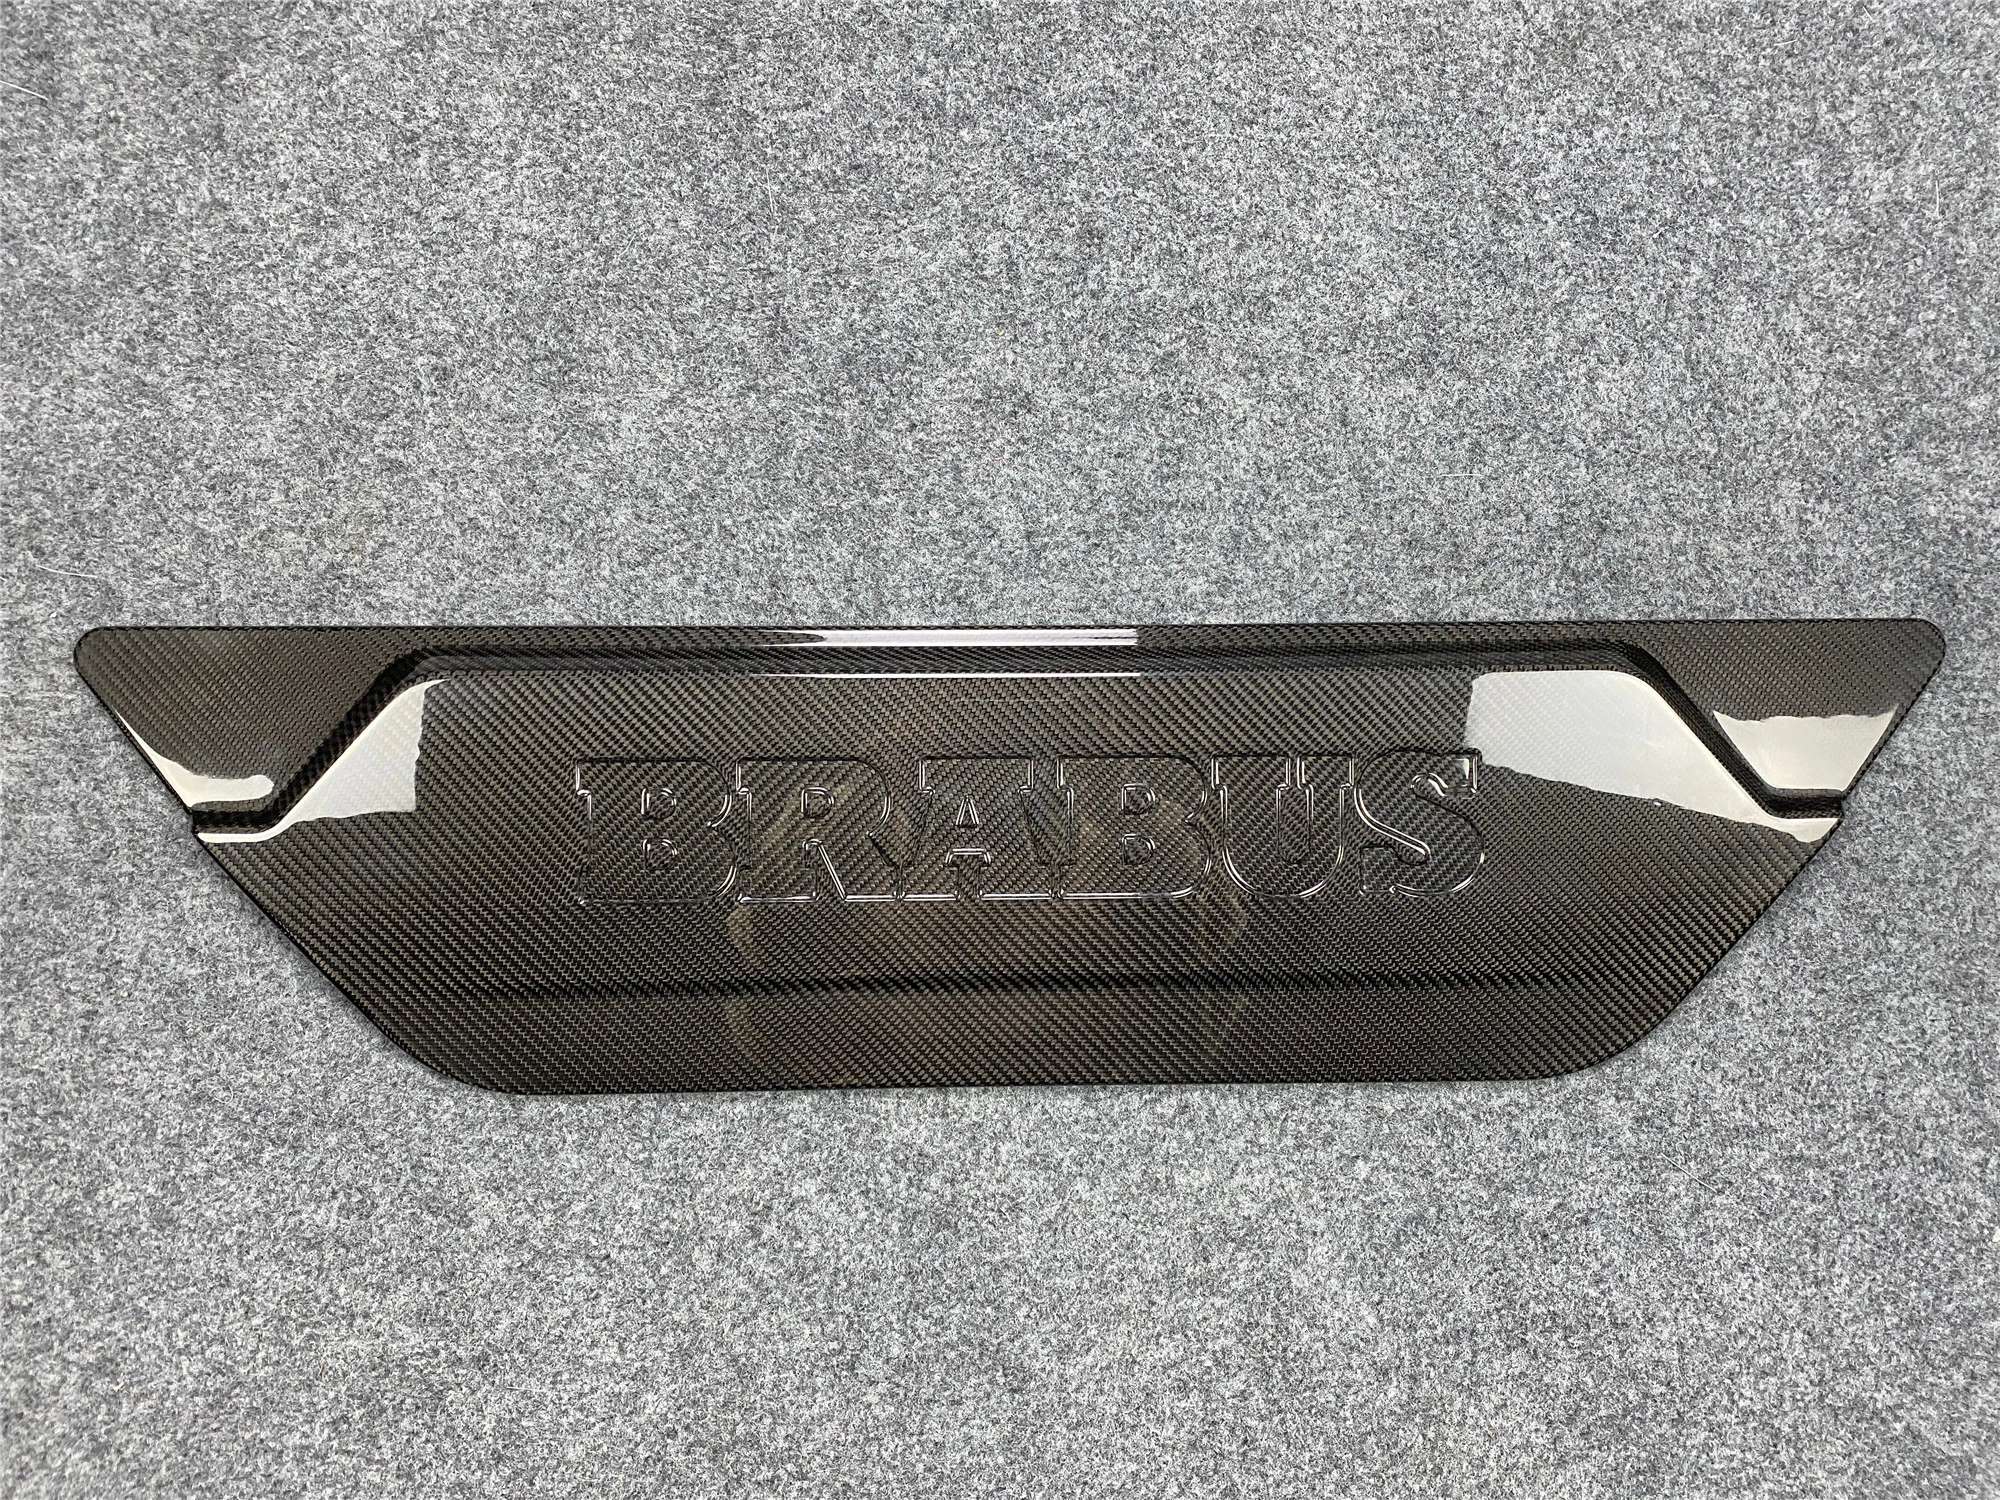 BS rear door trim G class w463A W464 G63 G500 G350 carbon fiber Tail door cover plate perfect fitment high quality